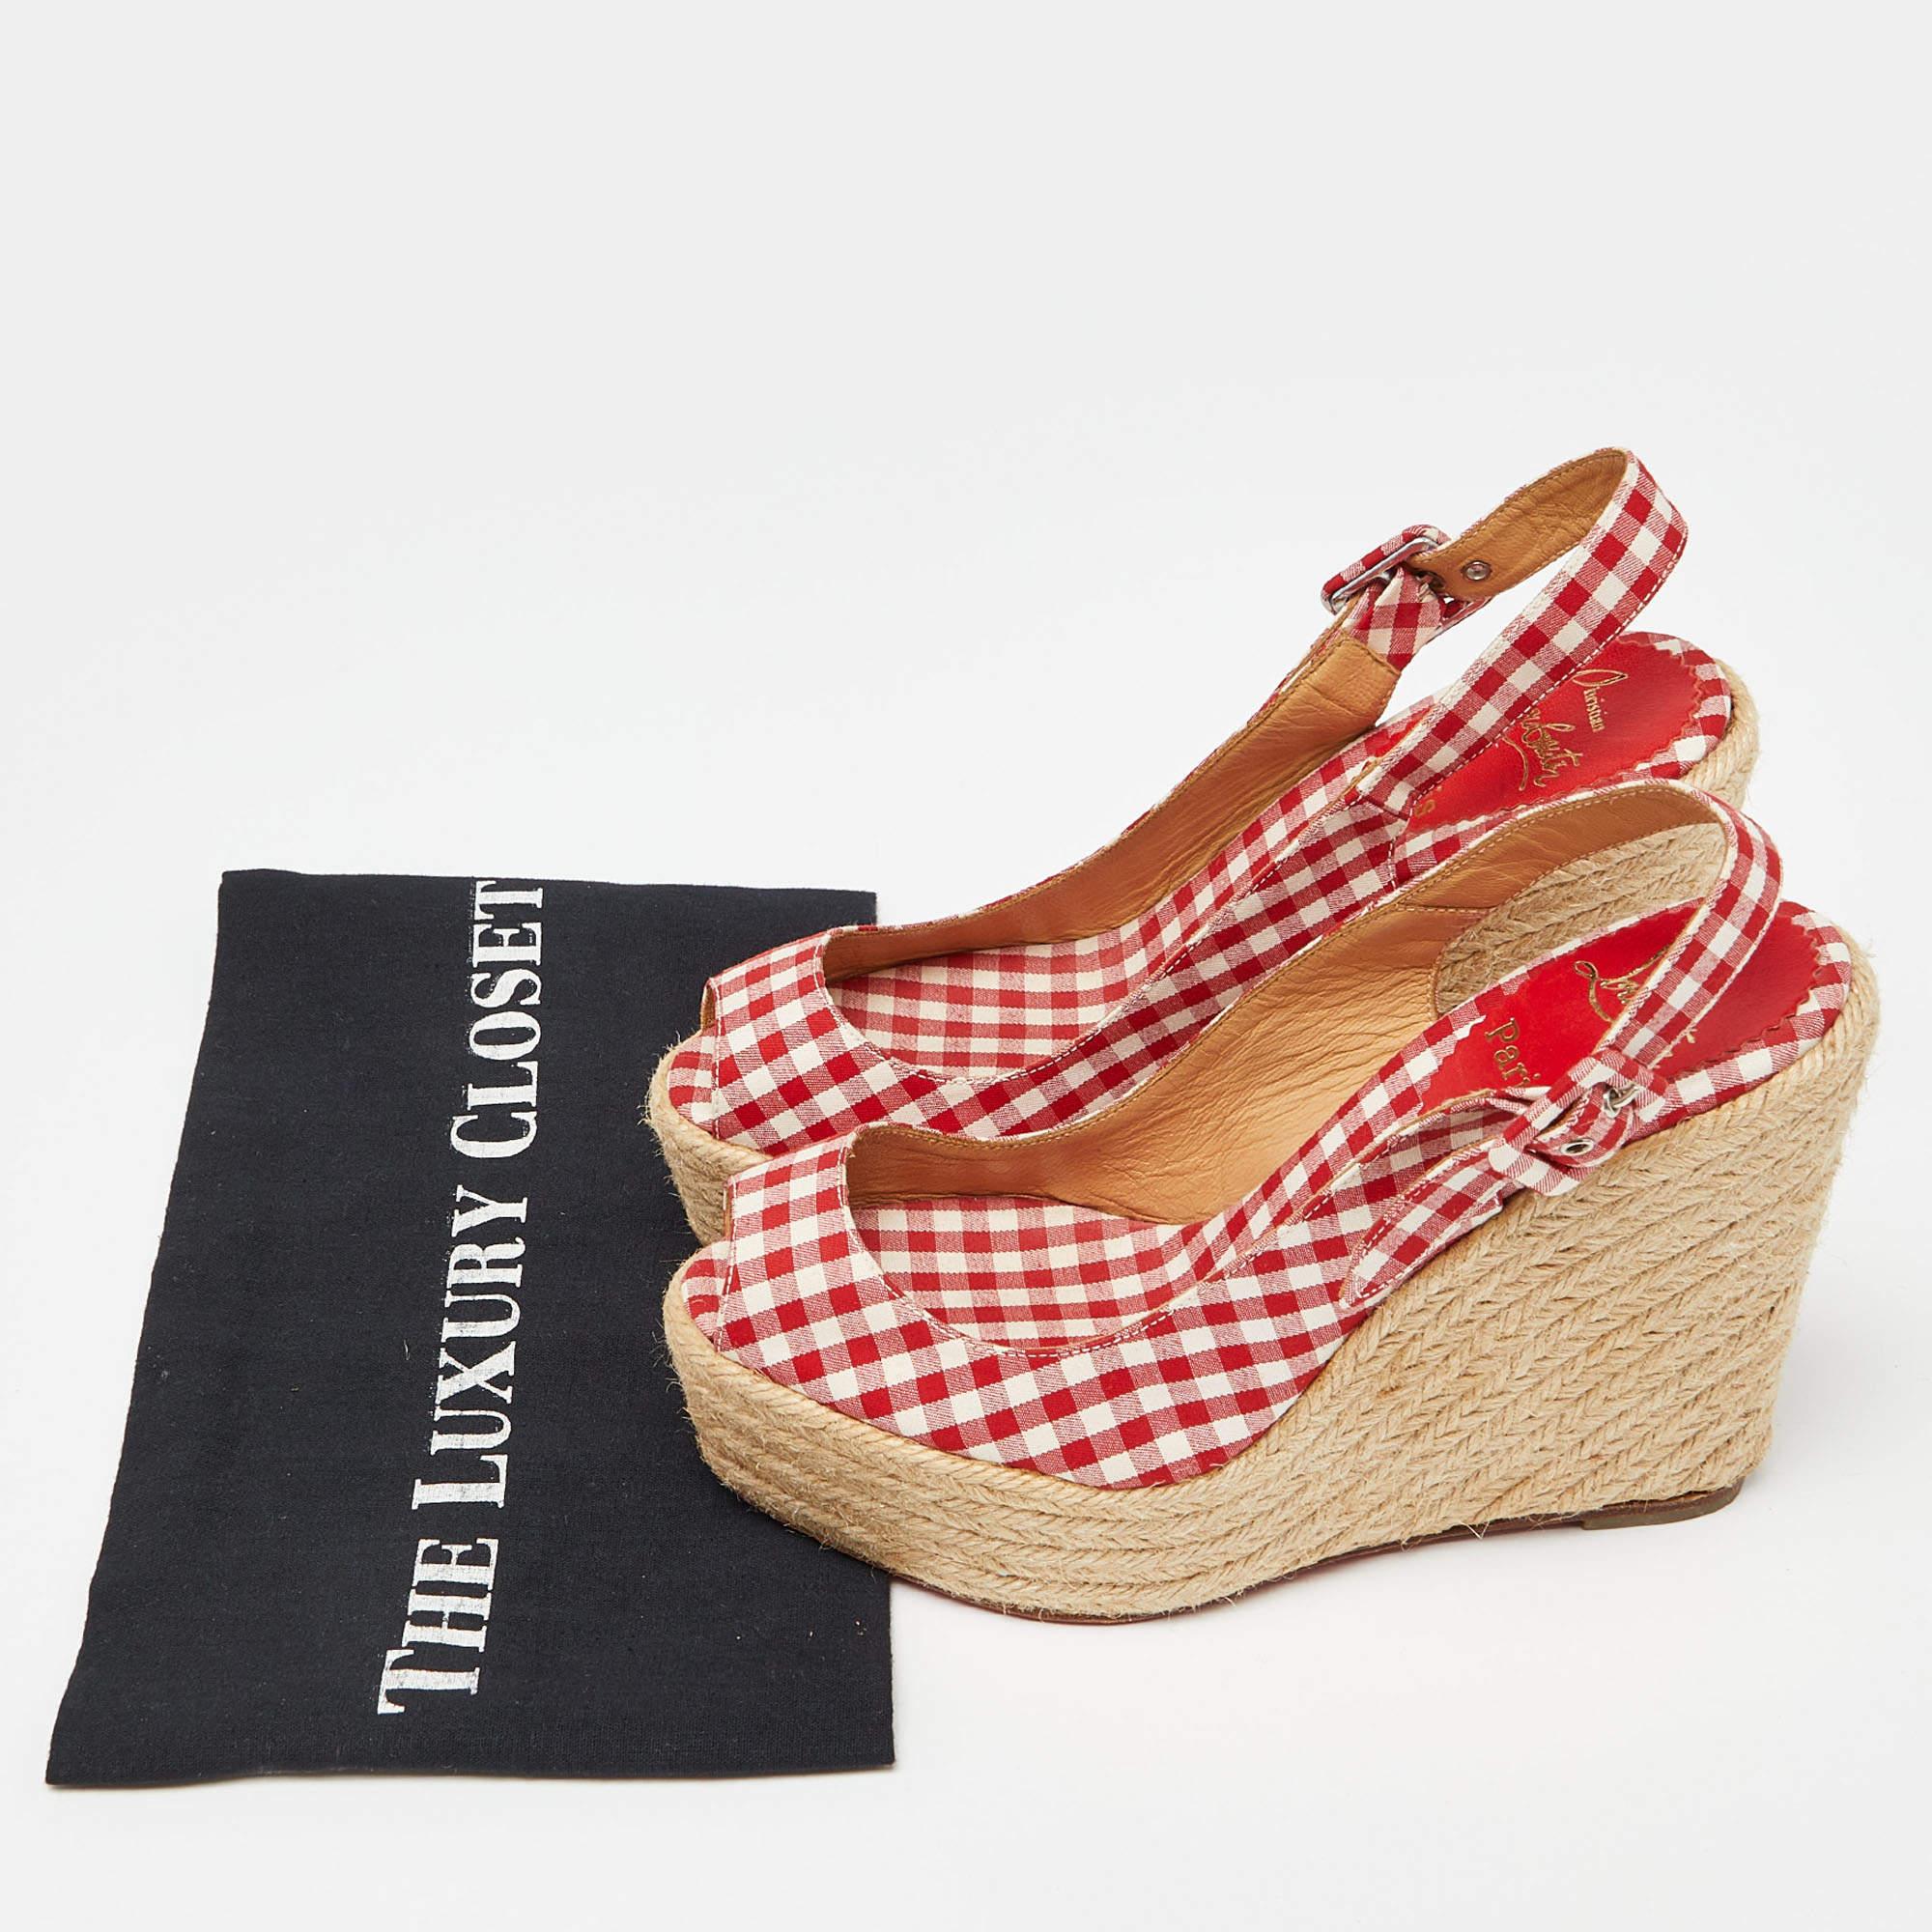 Christian Louboutin Red/White Gingham Fabric Menorca Espadrille Wedge Size 37 For Sale 5